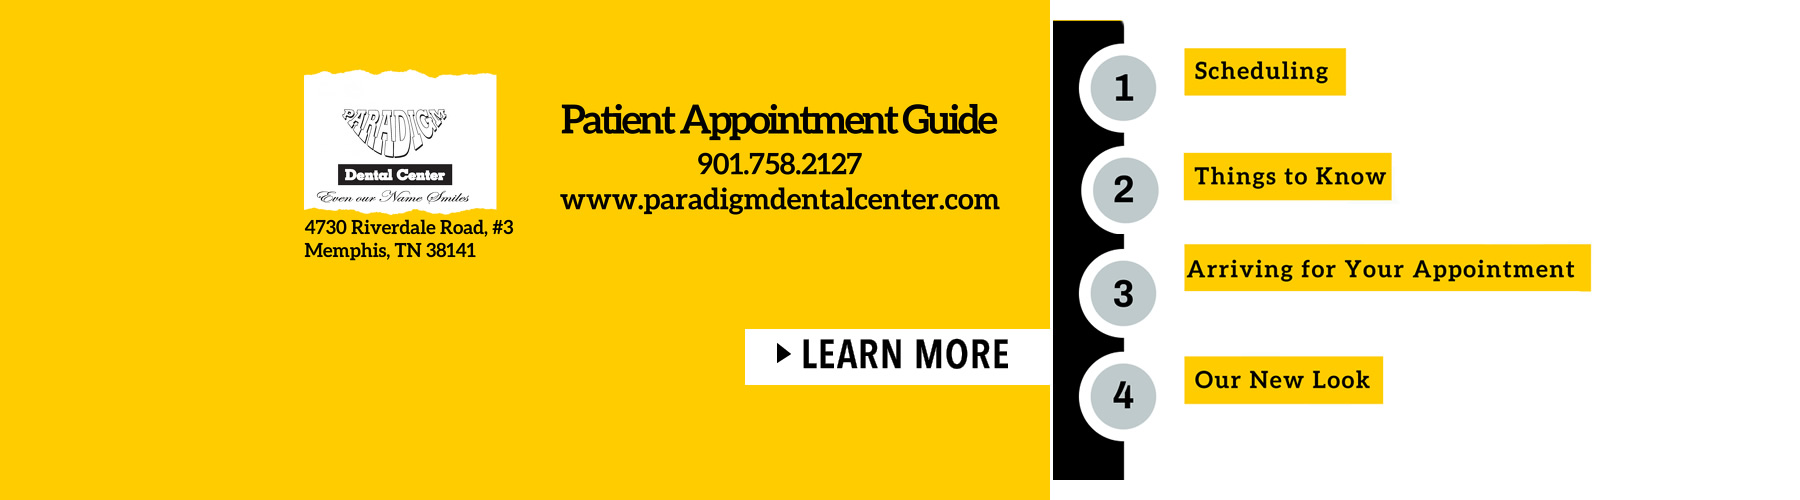 Patient Appointment Guide